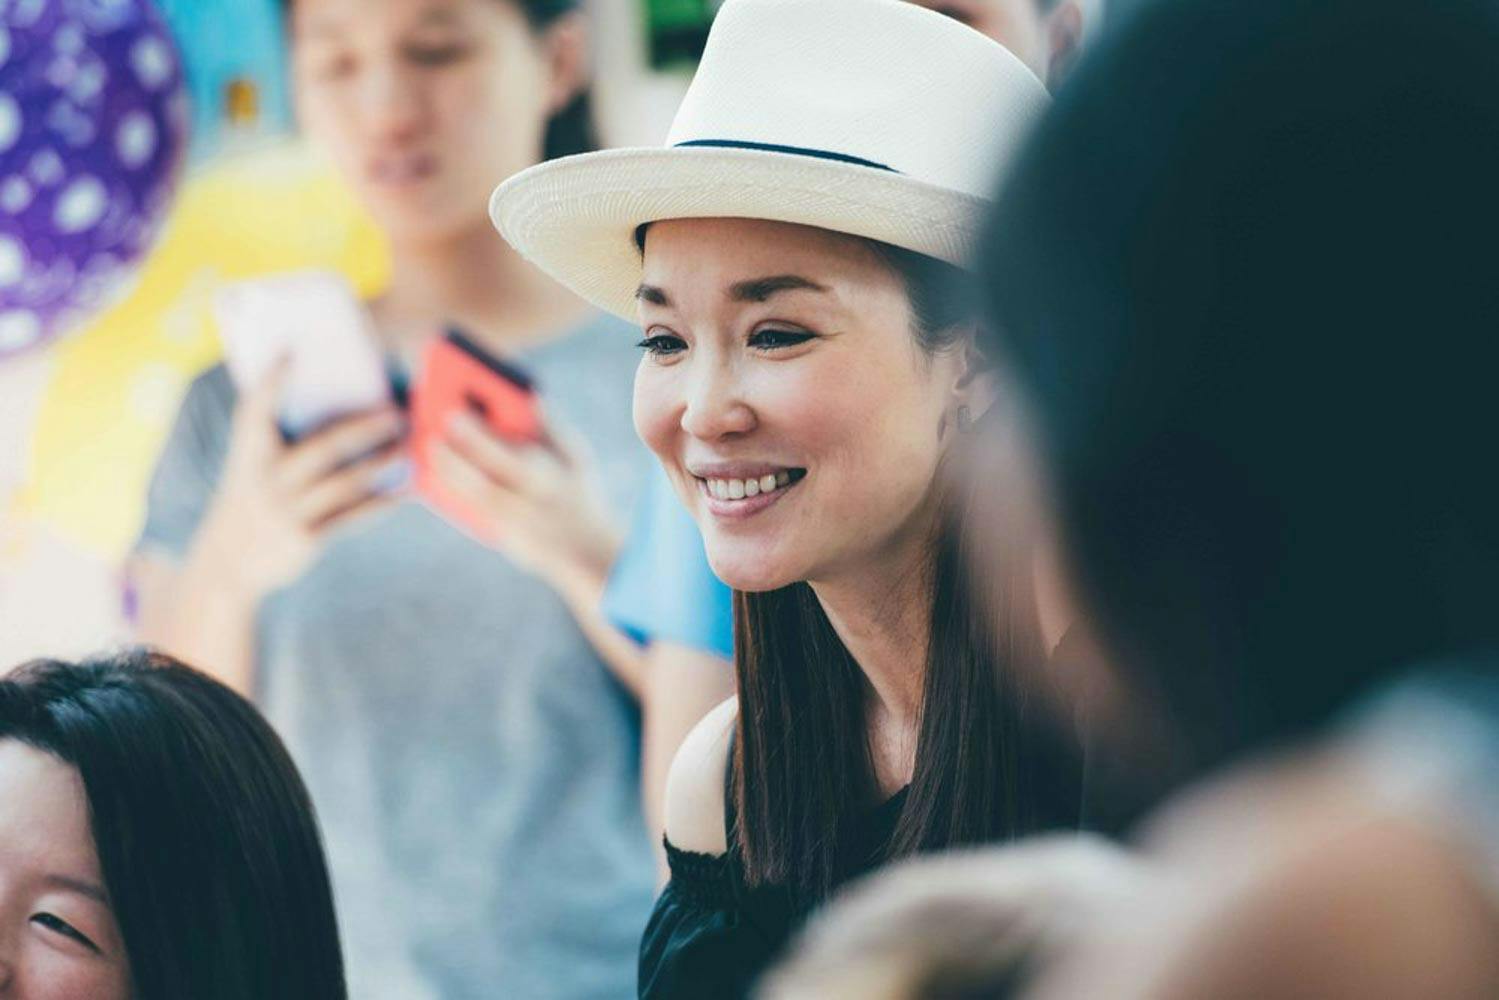 mediacorp actress Fann Wong at a kids birthday party in singapore by professional photographer